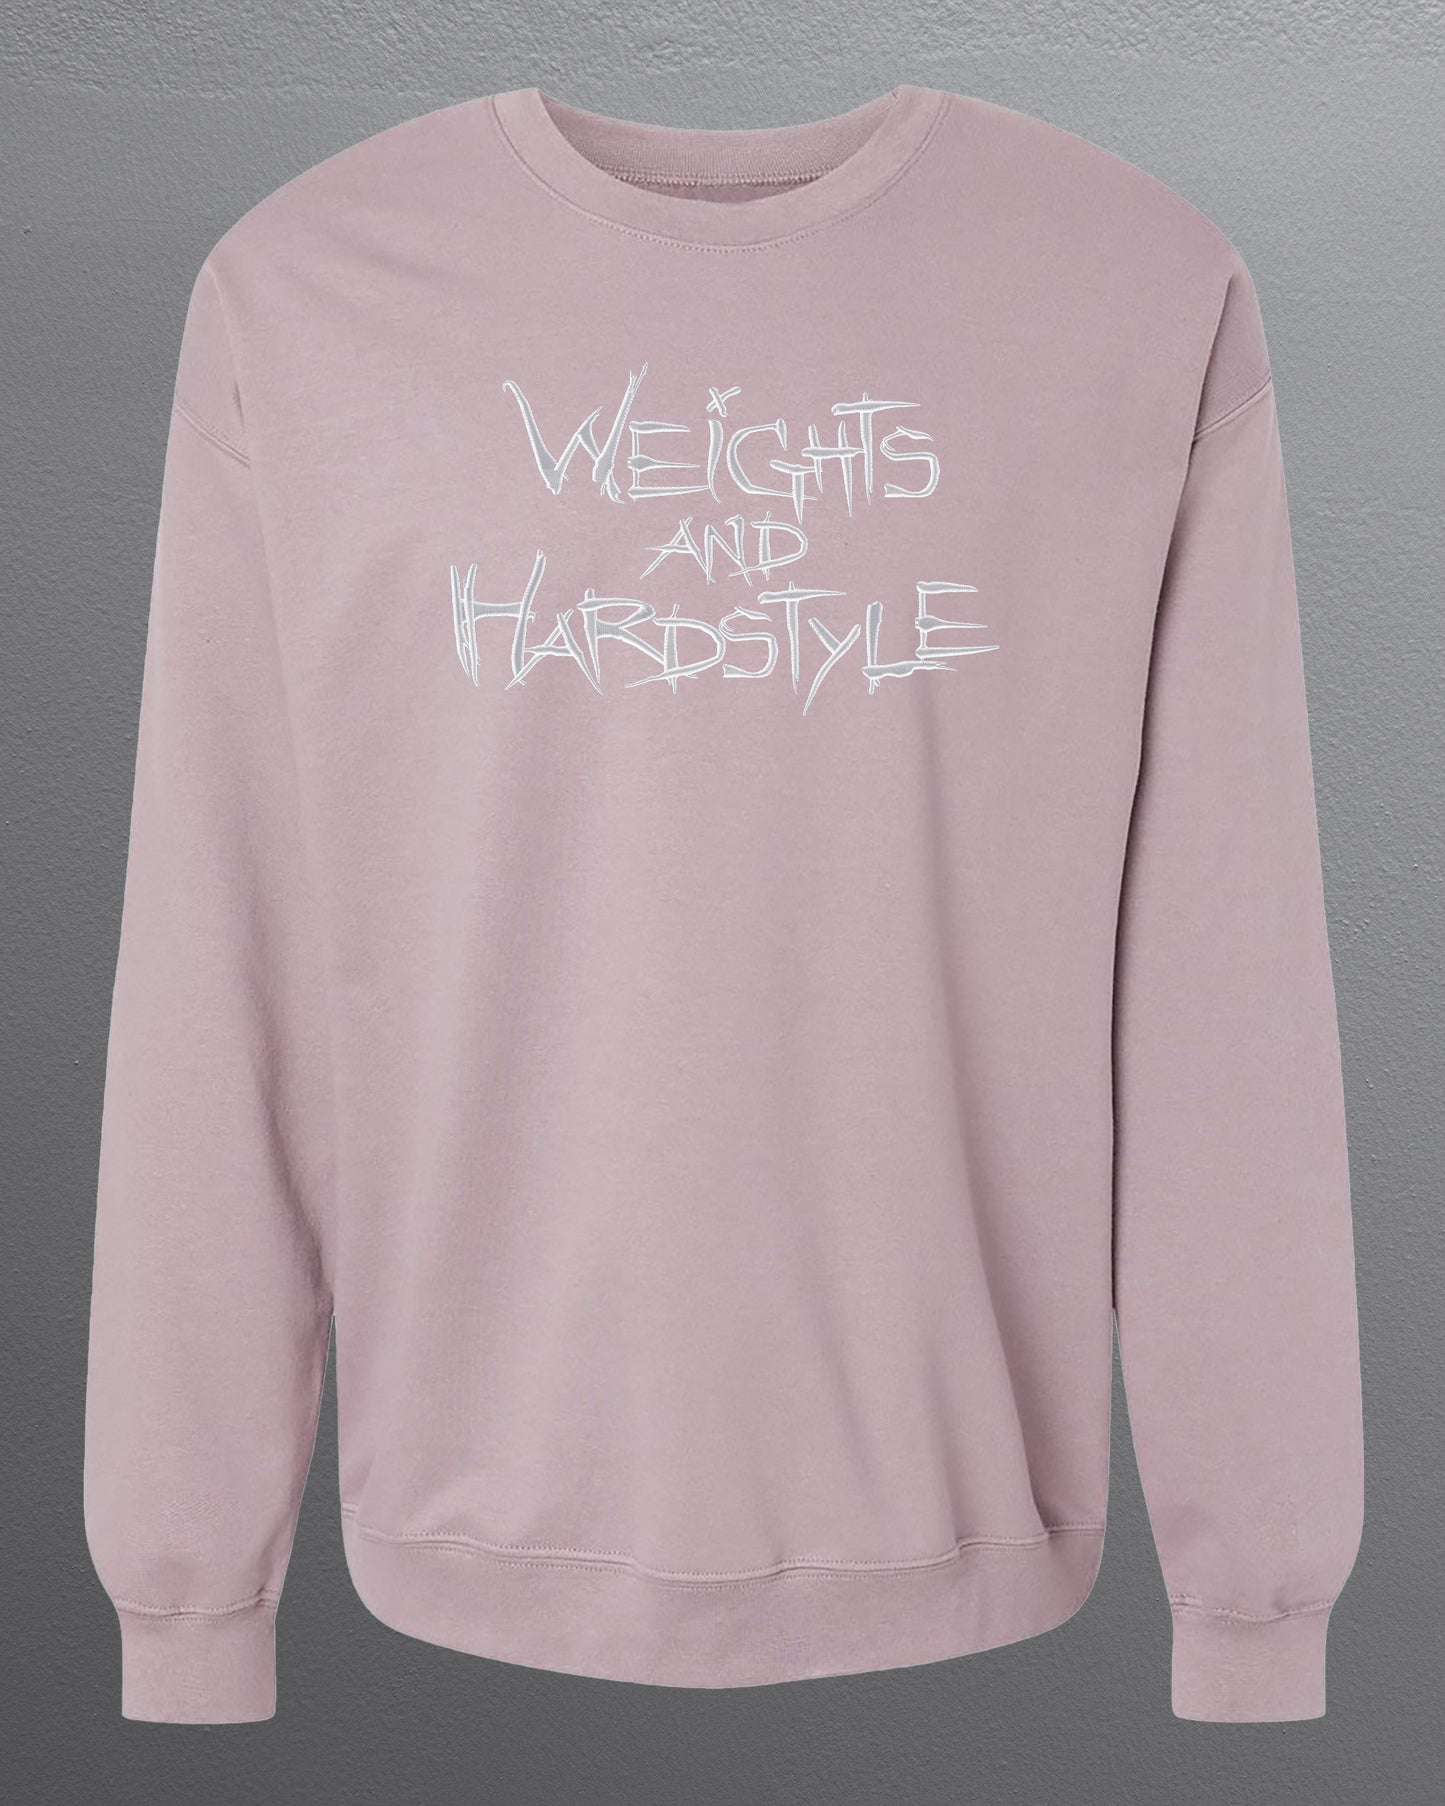 Weights and Hardstyle Crewneck